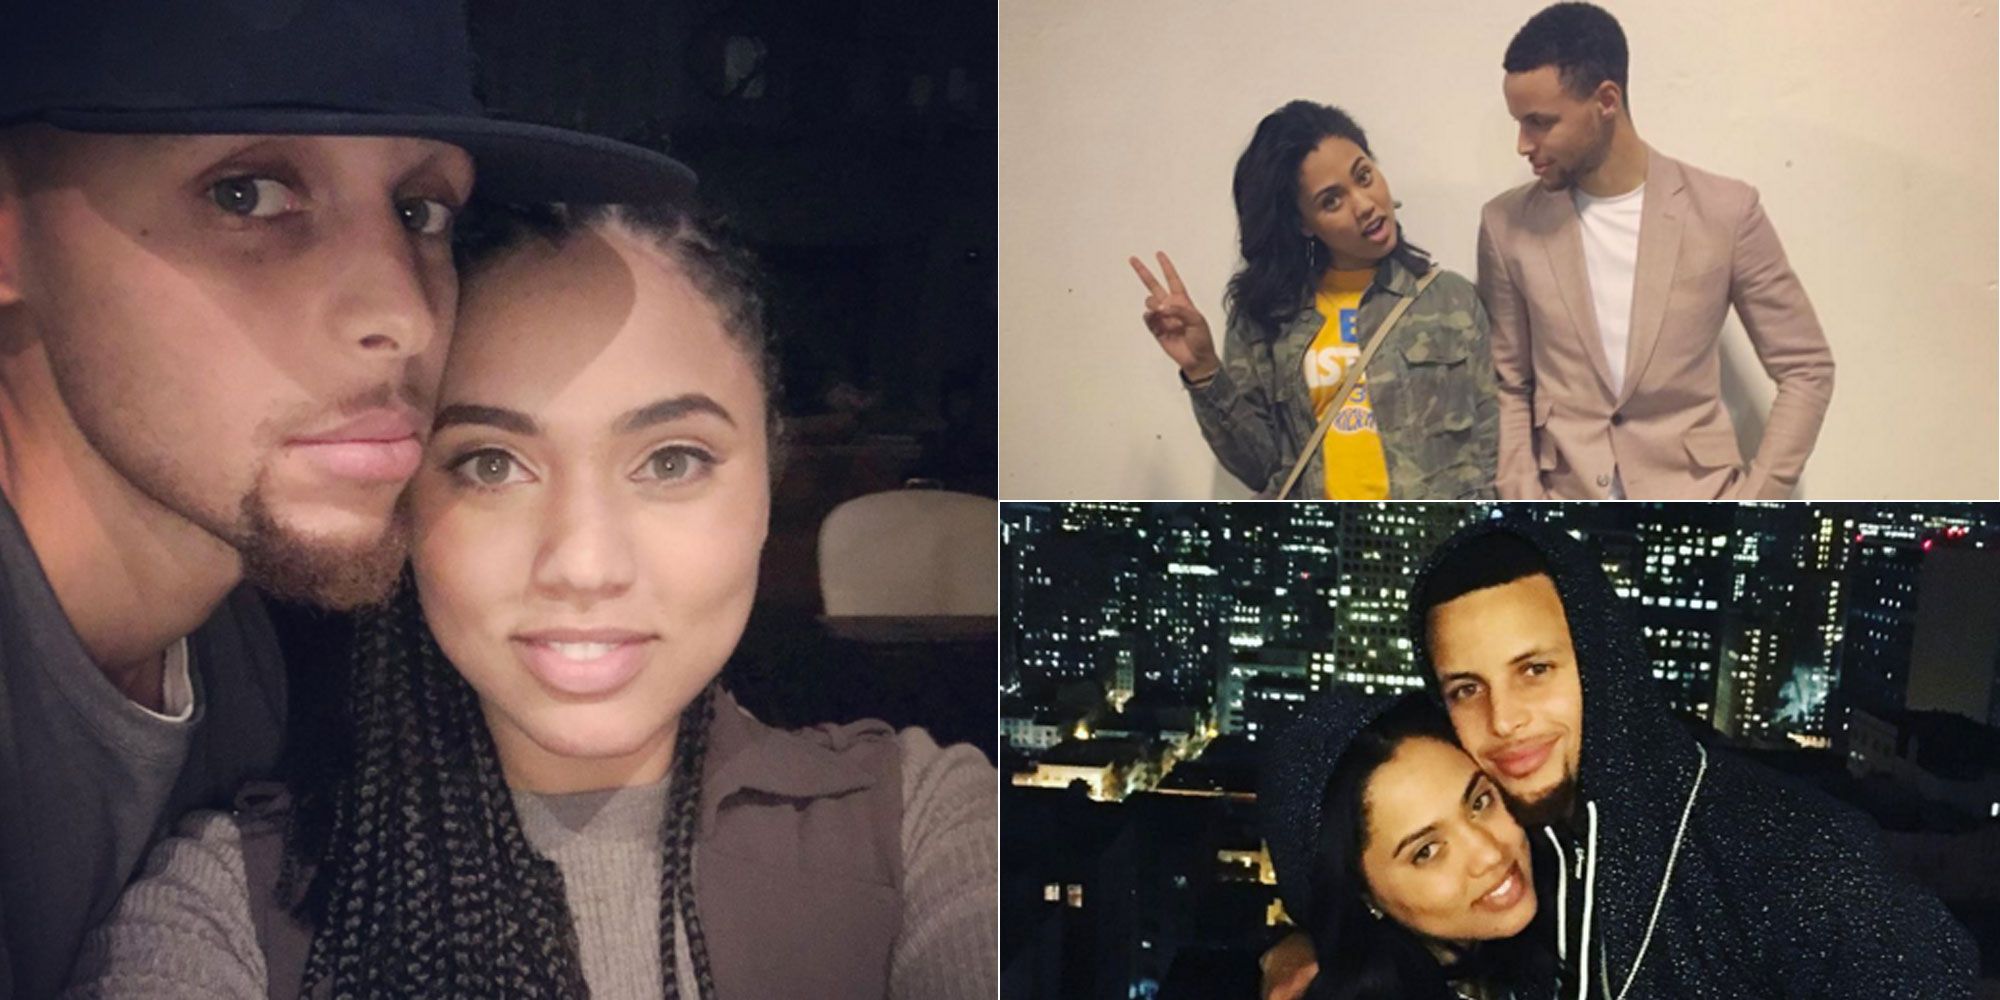 Ayesha Curry puts marriage to Stephen Curry before kids